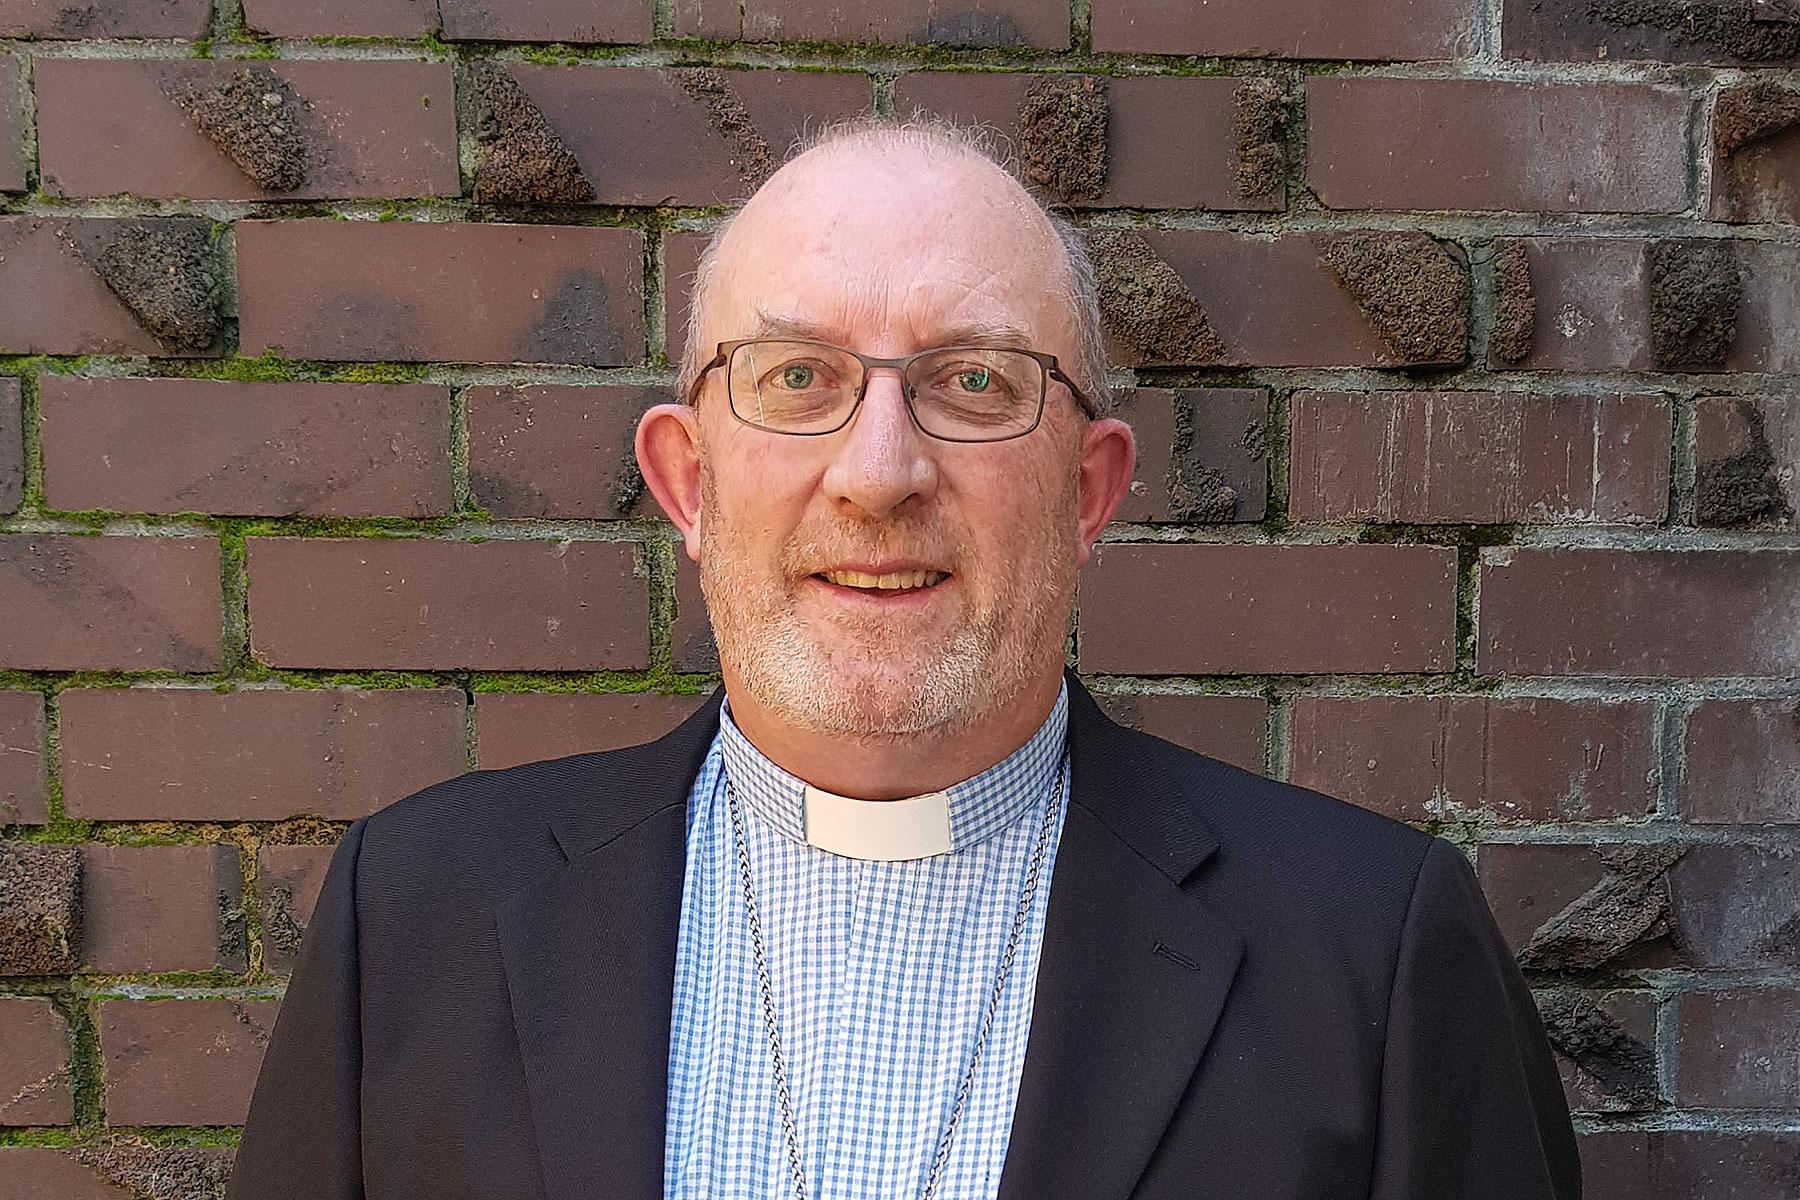 Rev Mark Whitfield, Bishop of the Lutheran Church of New Zealand. Photo: LCNZ